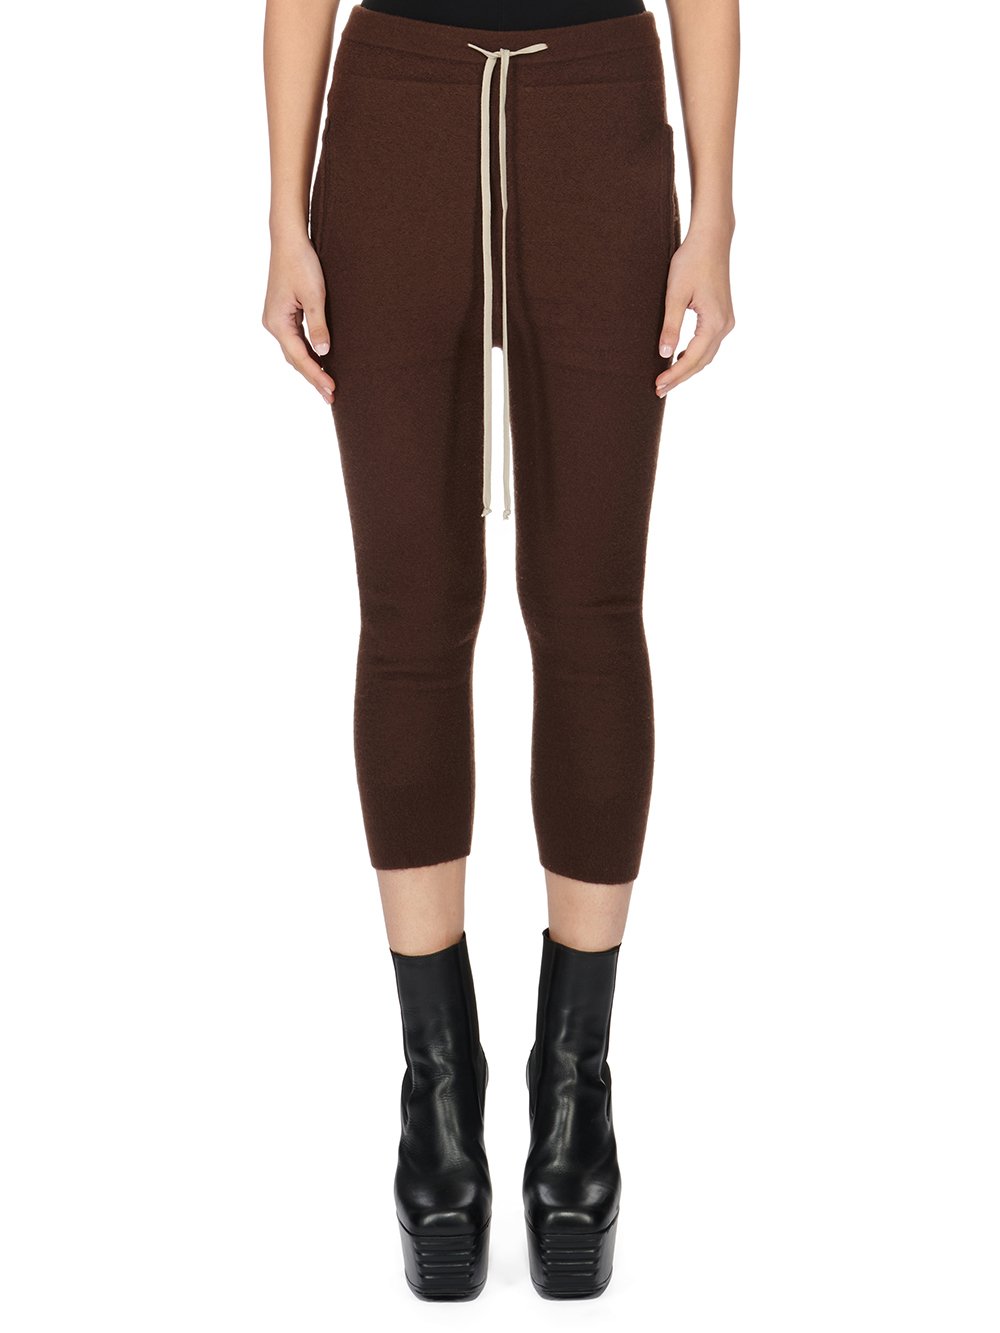 RICK OWENS FW23 LUXOR TRACK PANTS IN BROWN BOILED CASHMERE KNIT